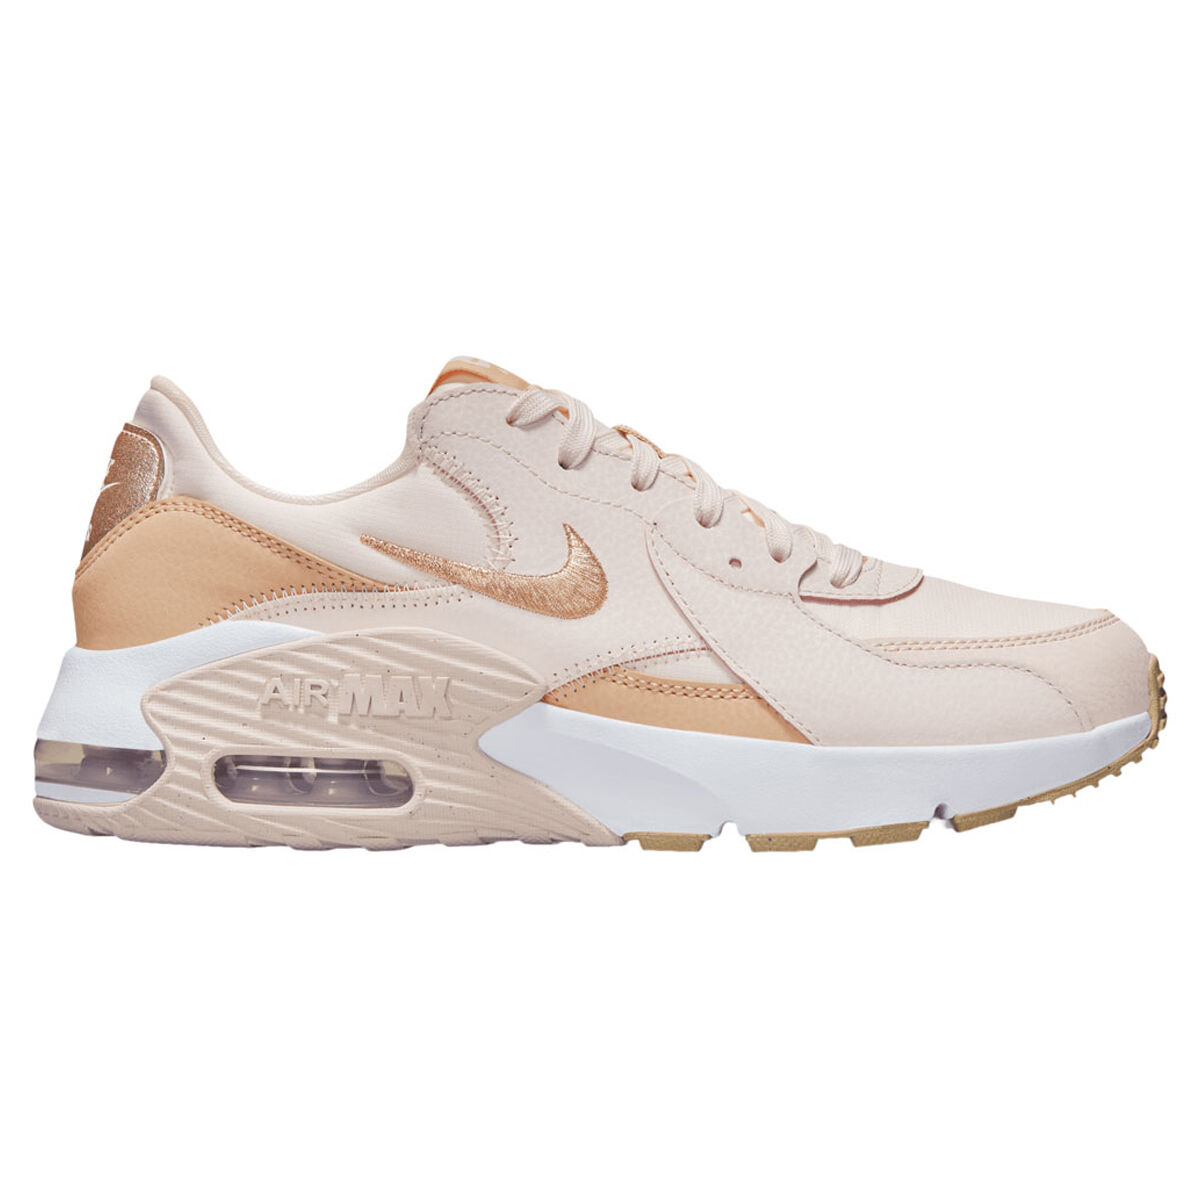 nike women's air max excee lifestyle shoes